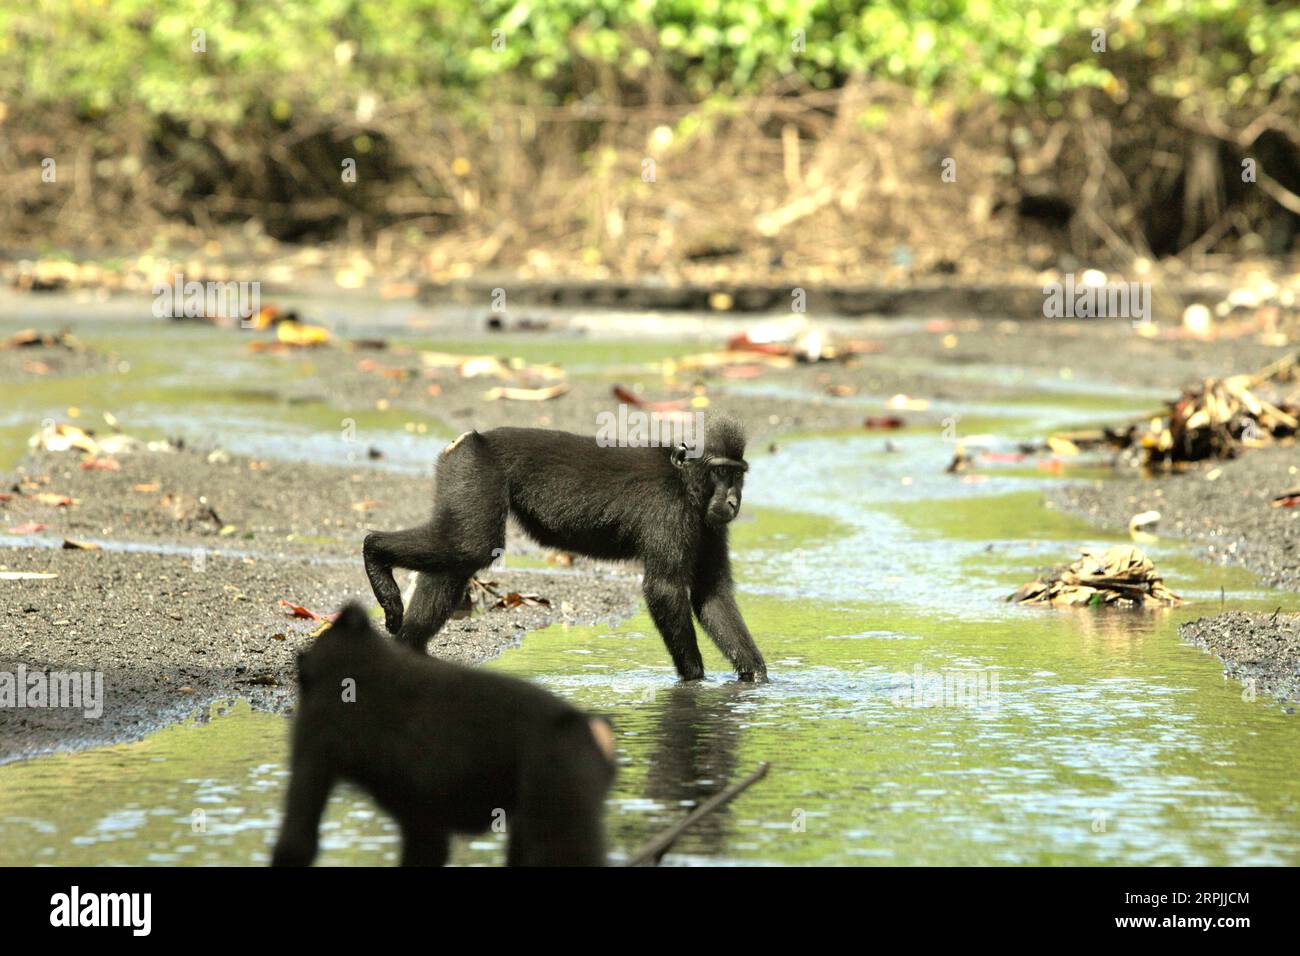 Crested macaques (Macaca nigra) are foraging on a stream close to a beach in Tangkoko forest, North Sulawesi, Indonesia. Climate change may reduce the habitat suitability of primate species, that could force them to move out of safe habitats and face more potential conflicts with human, scientists say. A recent report revealed that the temperature is increasing in Tangkoko forest, and the overall fruit abundance decreased, while at the same time crested macaque belongs to the 10% of primate species that are highly vulnerable to droughts. Stock Photo